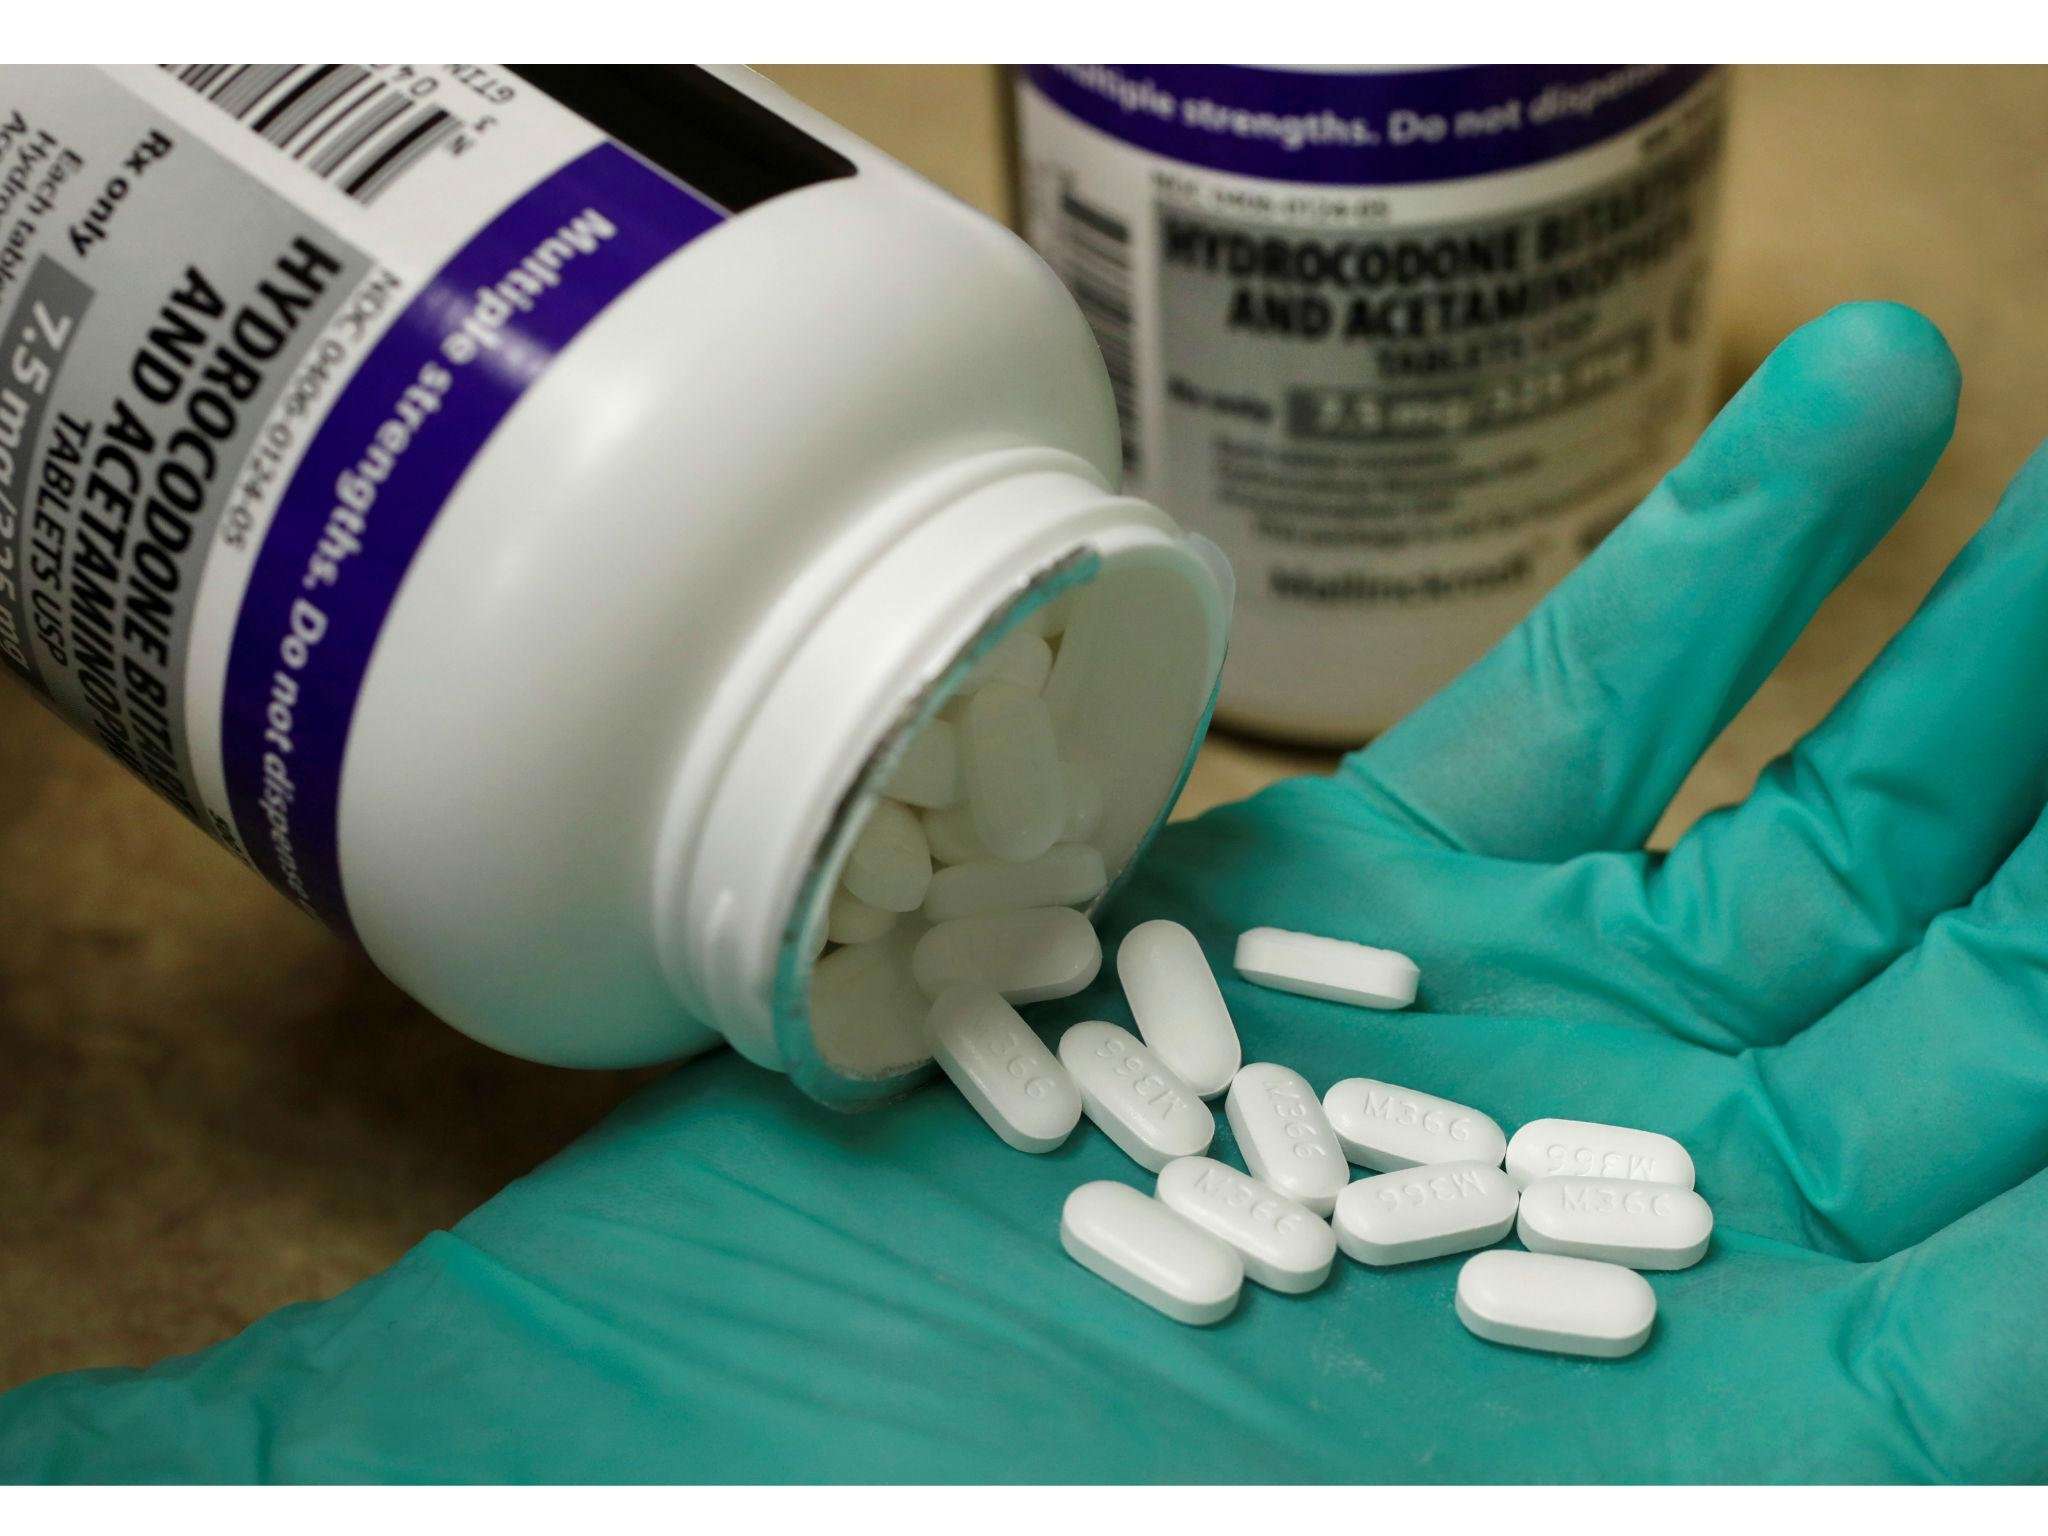 image for OxyContin creator being sued for 'significant role in causing opioid epidemic'